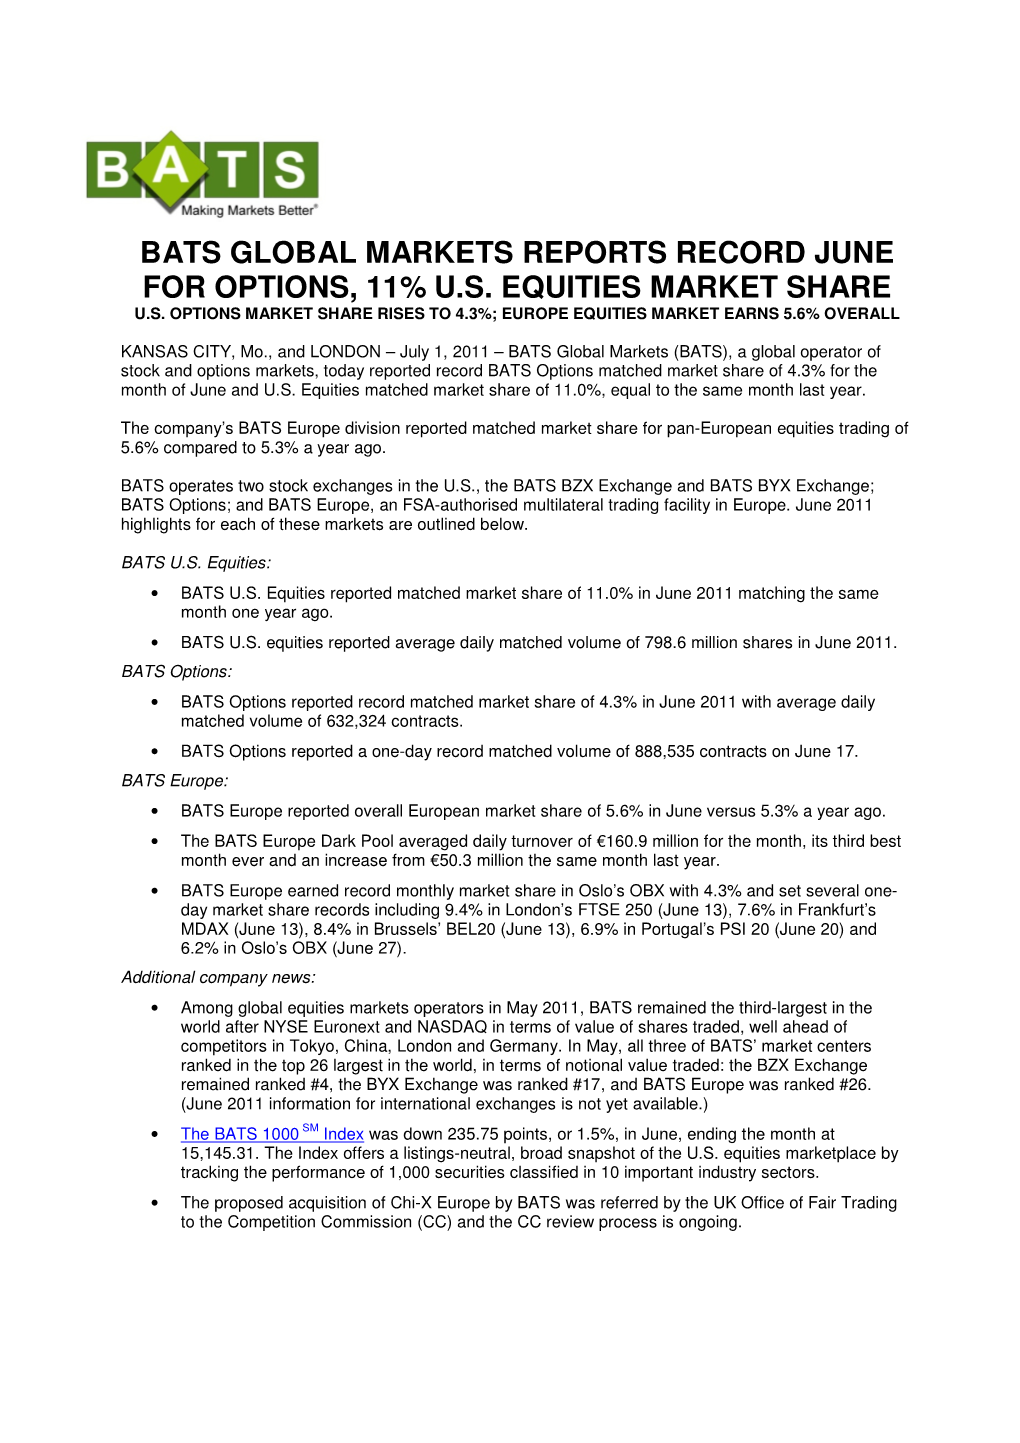 Bats Global Markets Reports Record June for Options, 11% U.S. Equities Market Share U.S